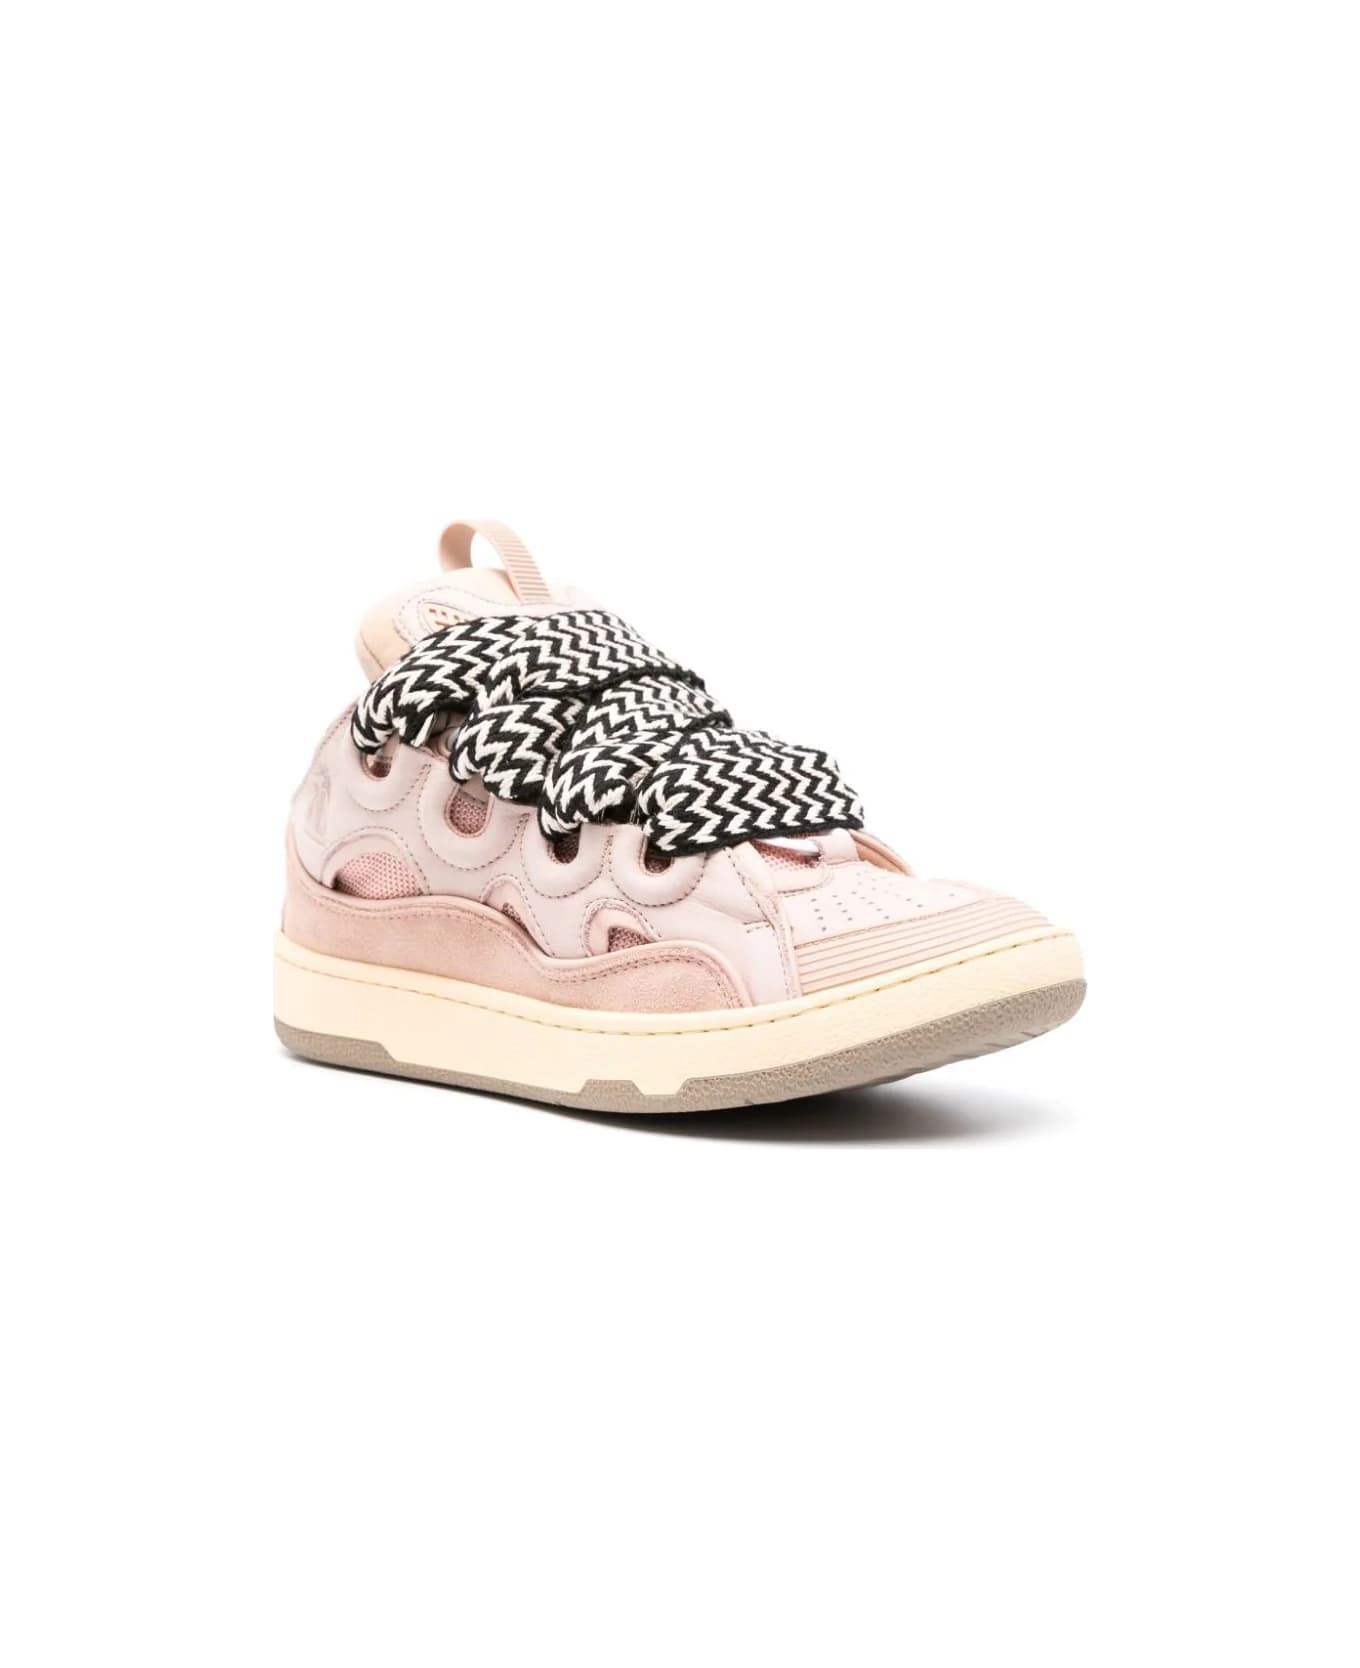 Lanvin Curb Sneakers In Pink Leather - Pink